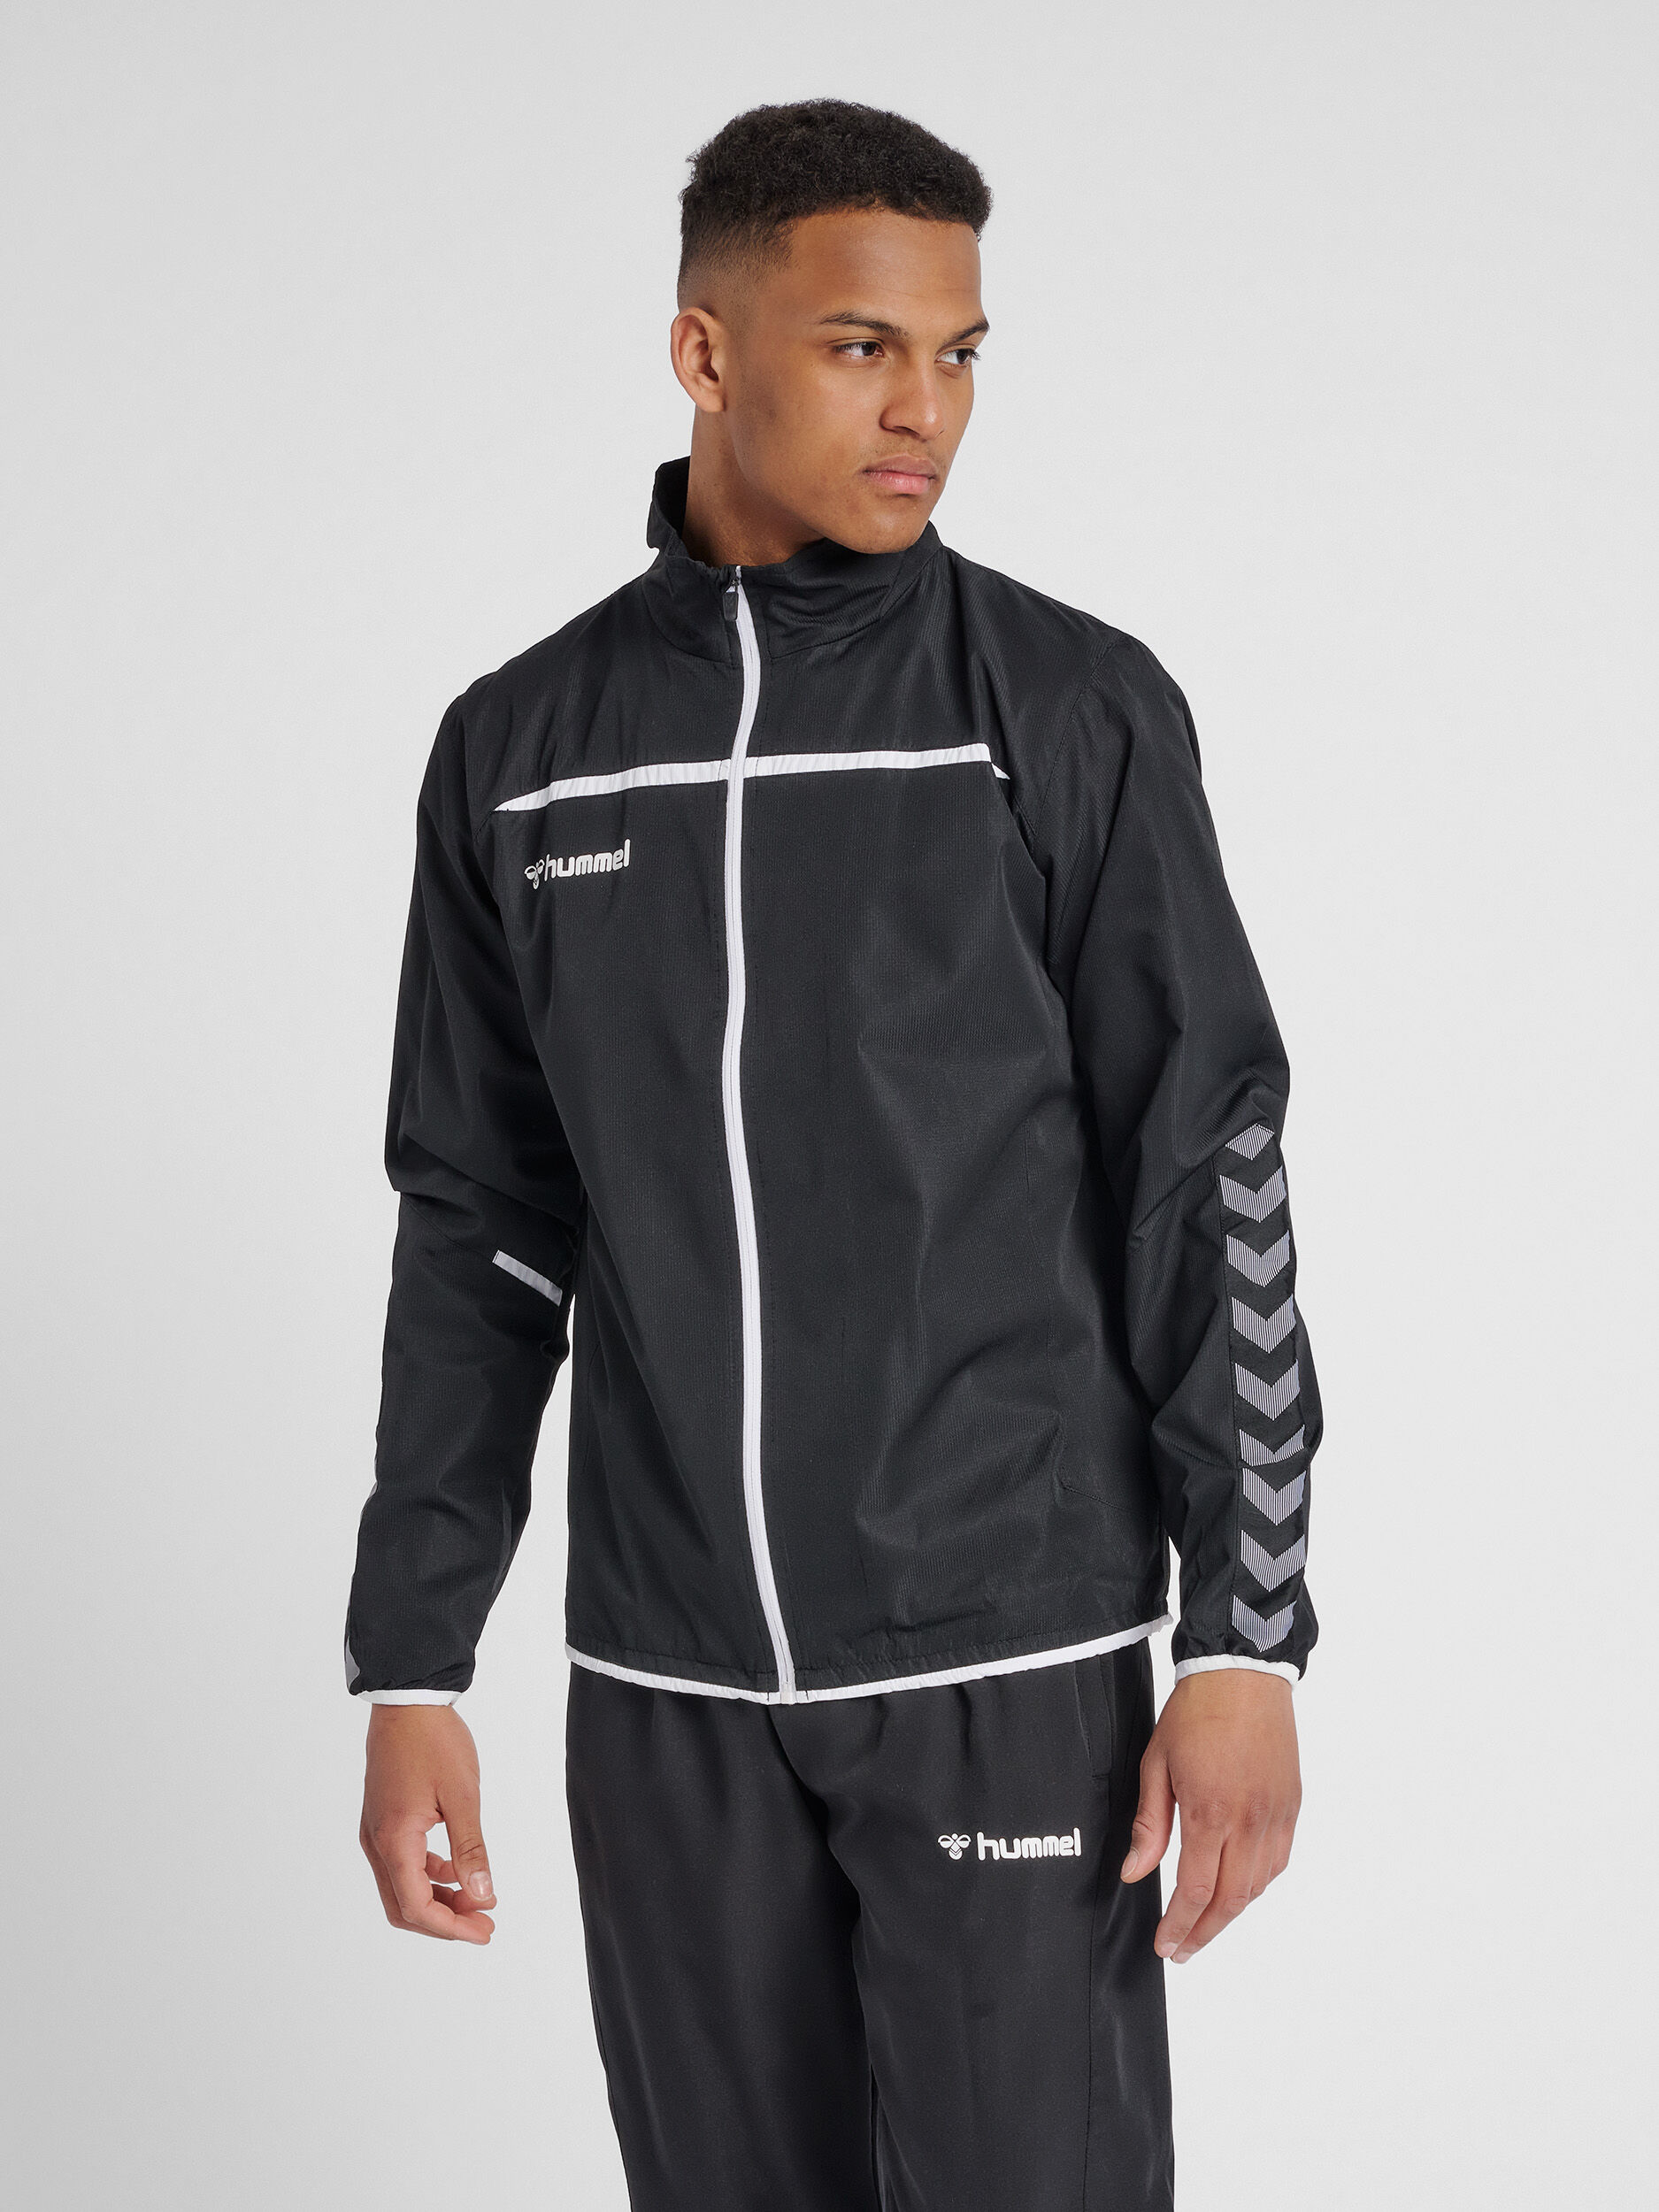 Details about   Hummel Mens Training Sports Casual Full Zip Jacket Tracksuit Thumb Hole Top 